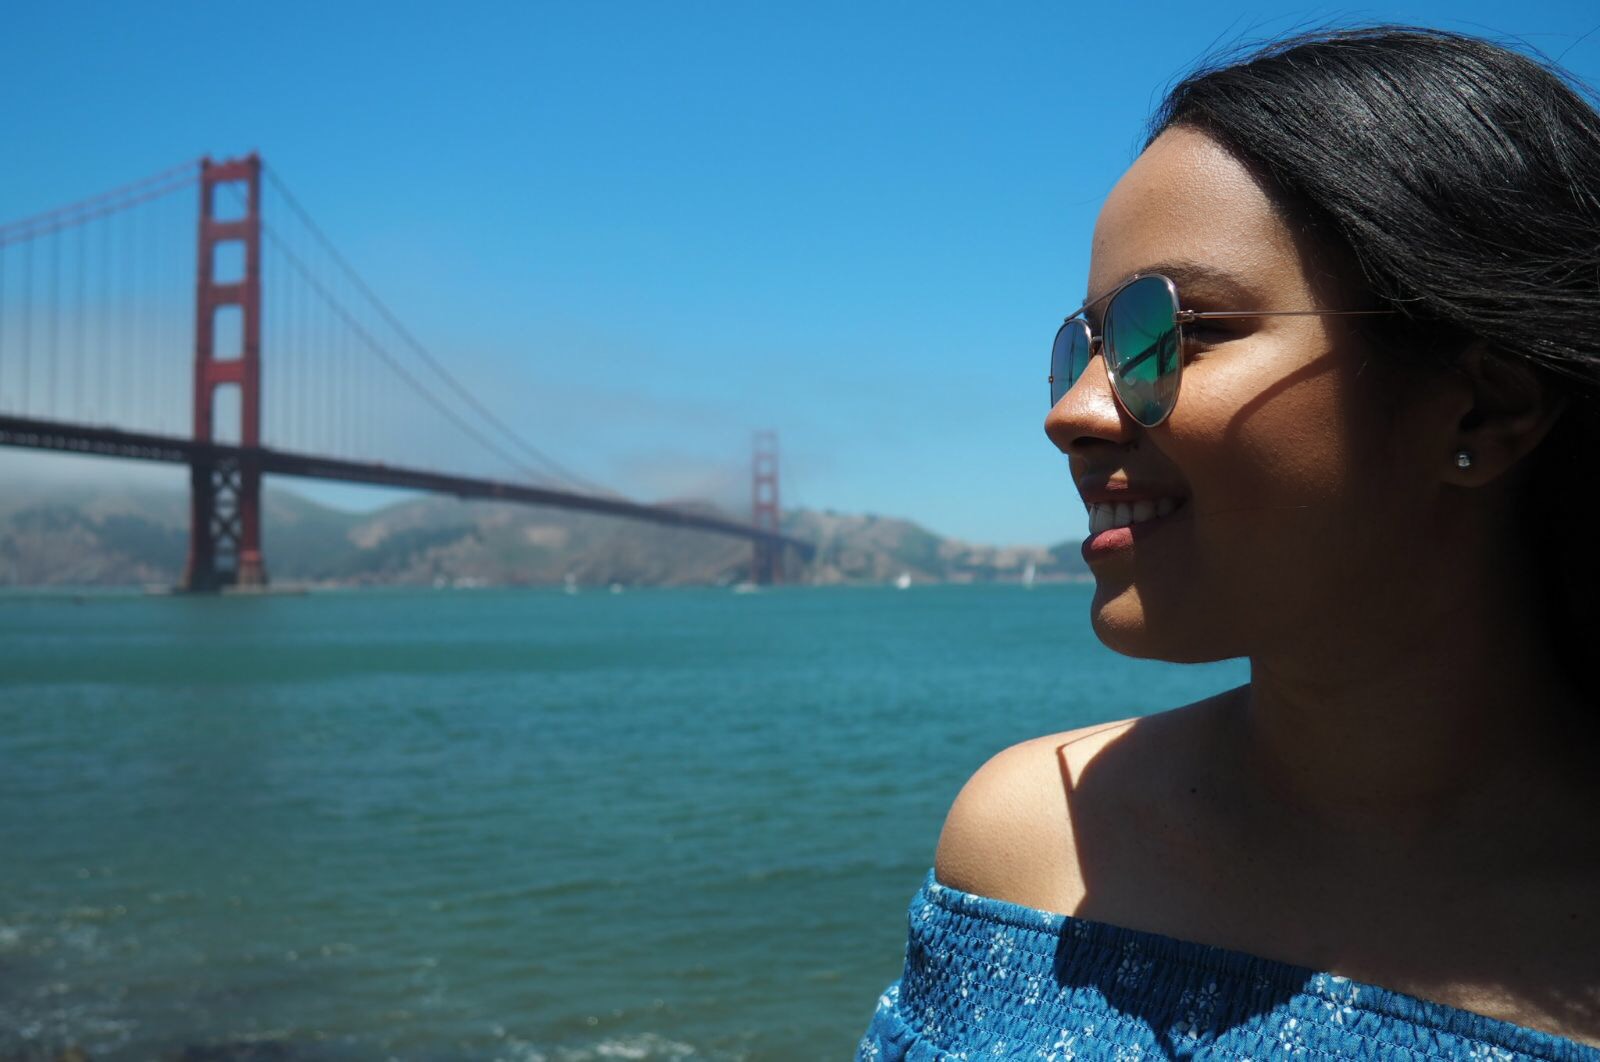 Mariana in San Francisco, with the infamous Golden Gate Bridge in the background.